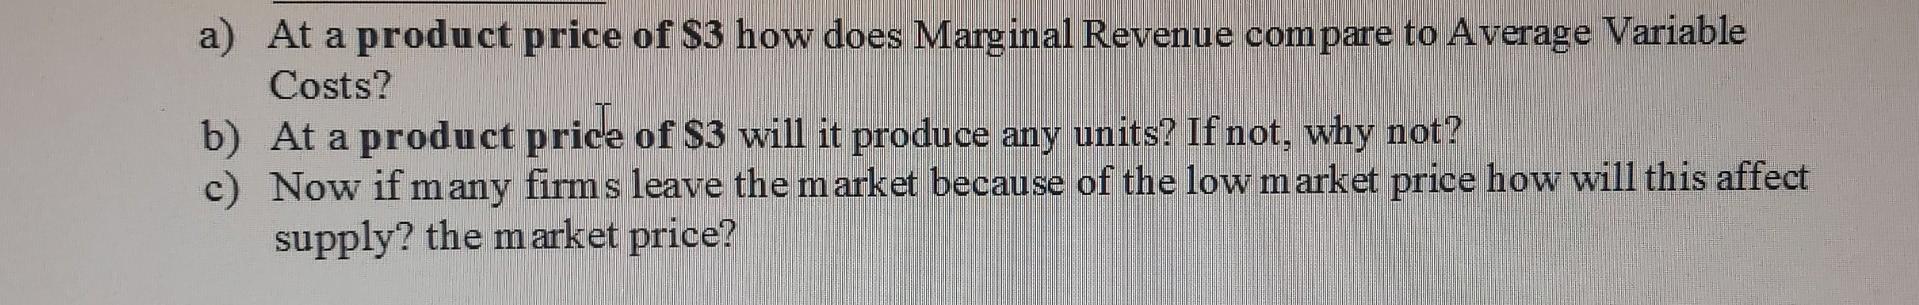 a) At a product price of $3 how does Marginal Revenue compare to Average Variable Costs? b) At a product price of S3 will it